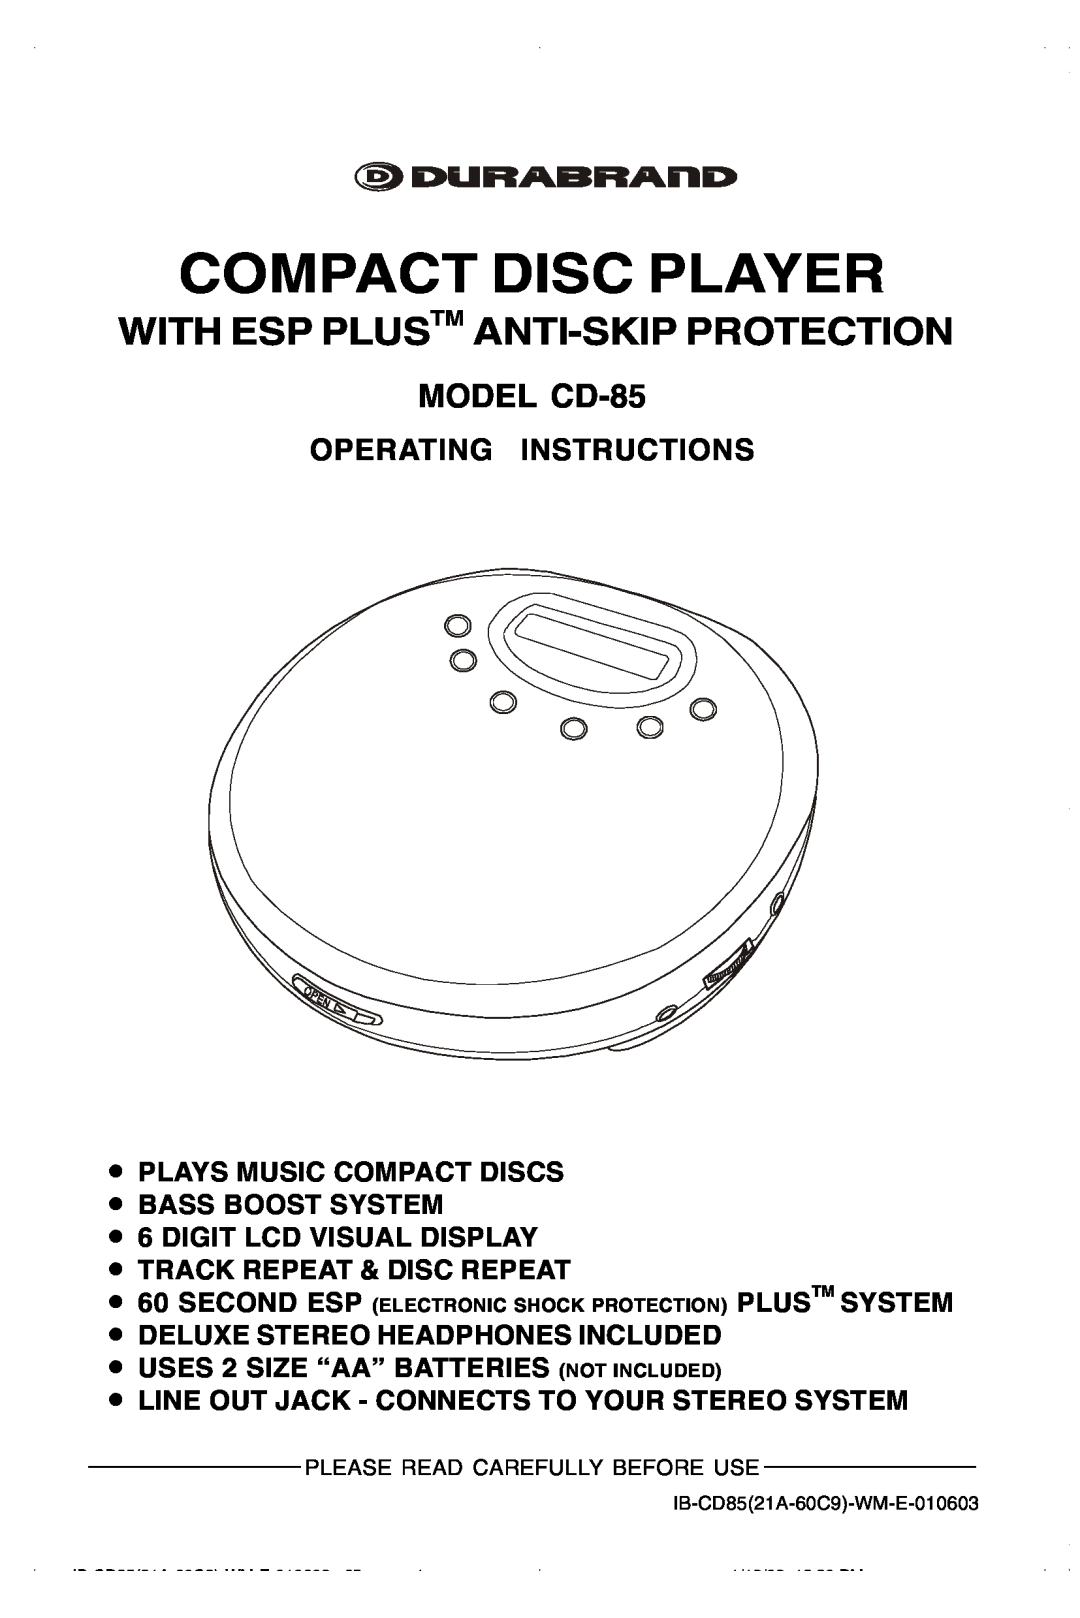 Lenoxx Electronics CD85 manual With Esp Plustm Anti-Skipprotection, MODEL CD-85, Operating Instructions 